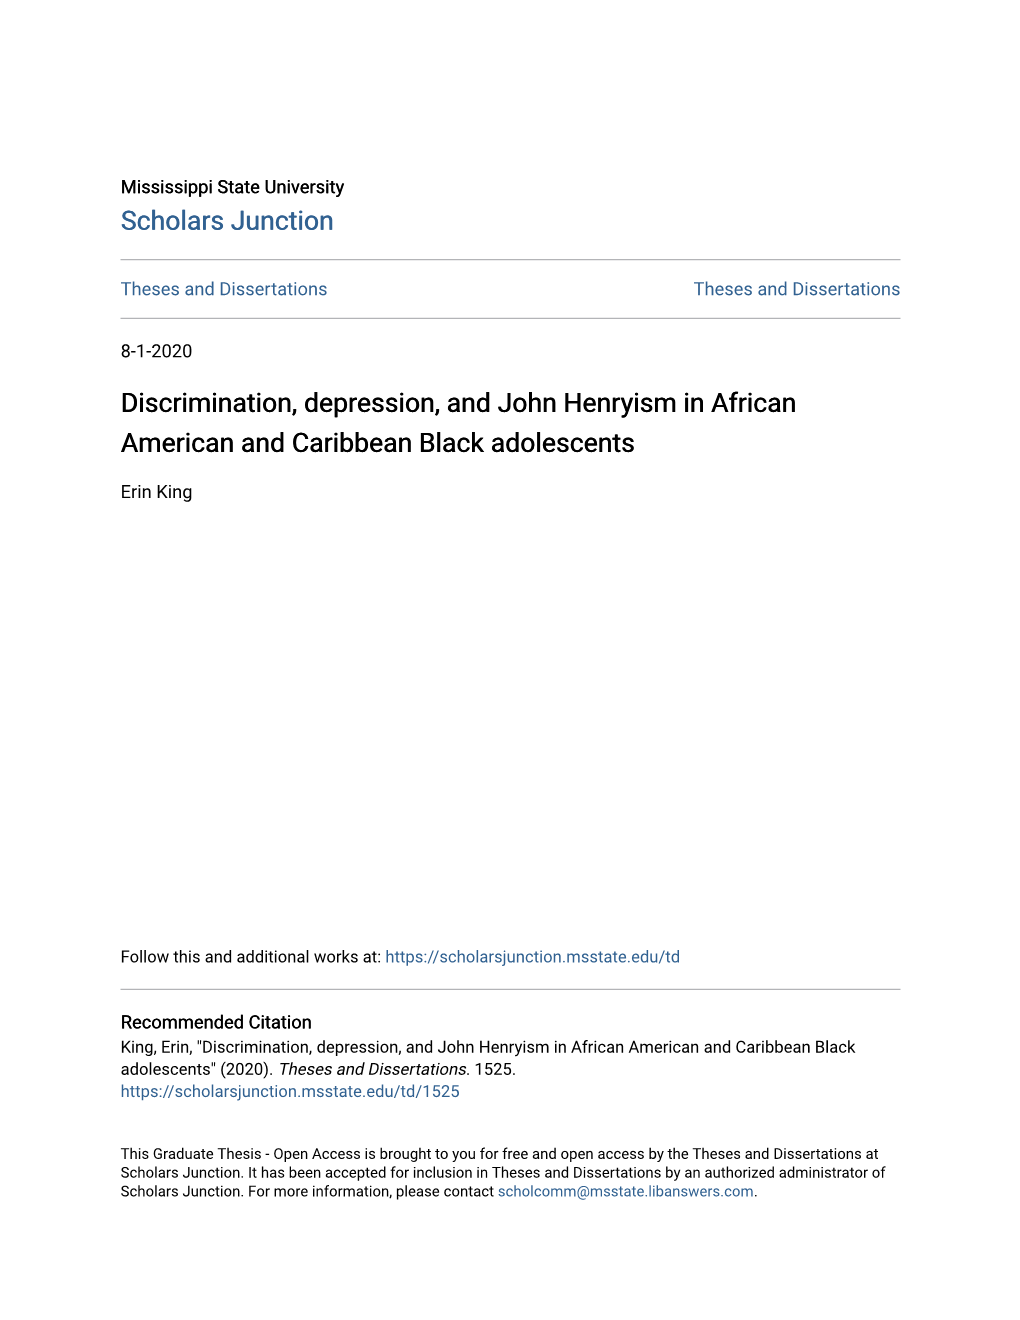 Discrimination, Depression, and John Henryism in African American and Caribbean Black Adolescents